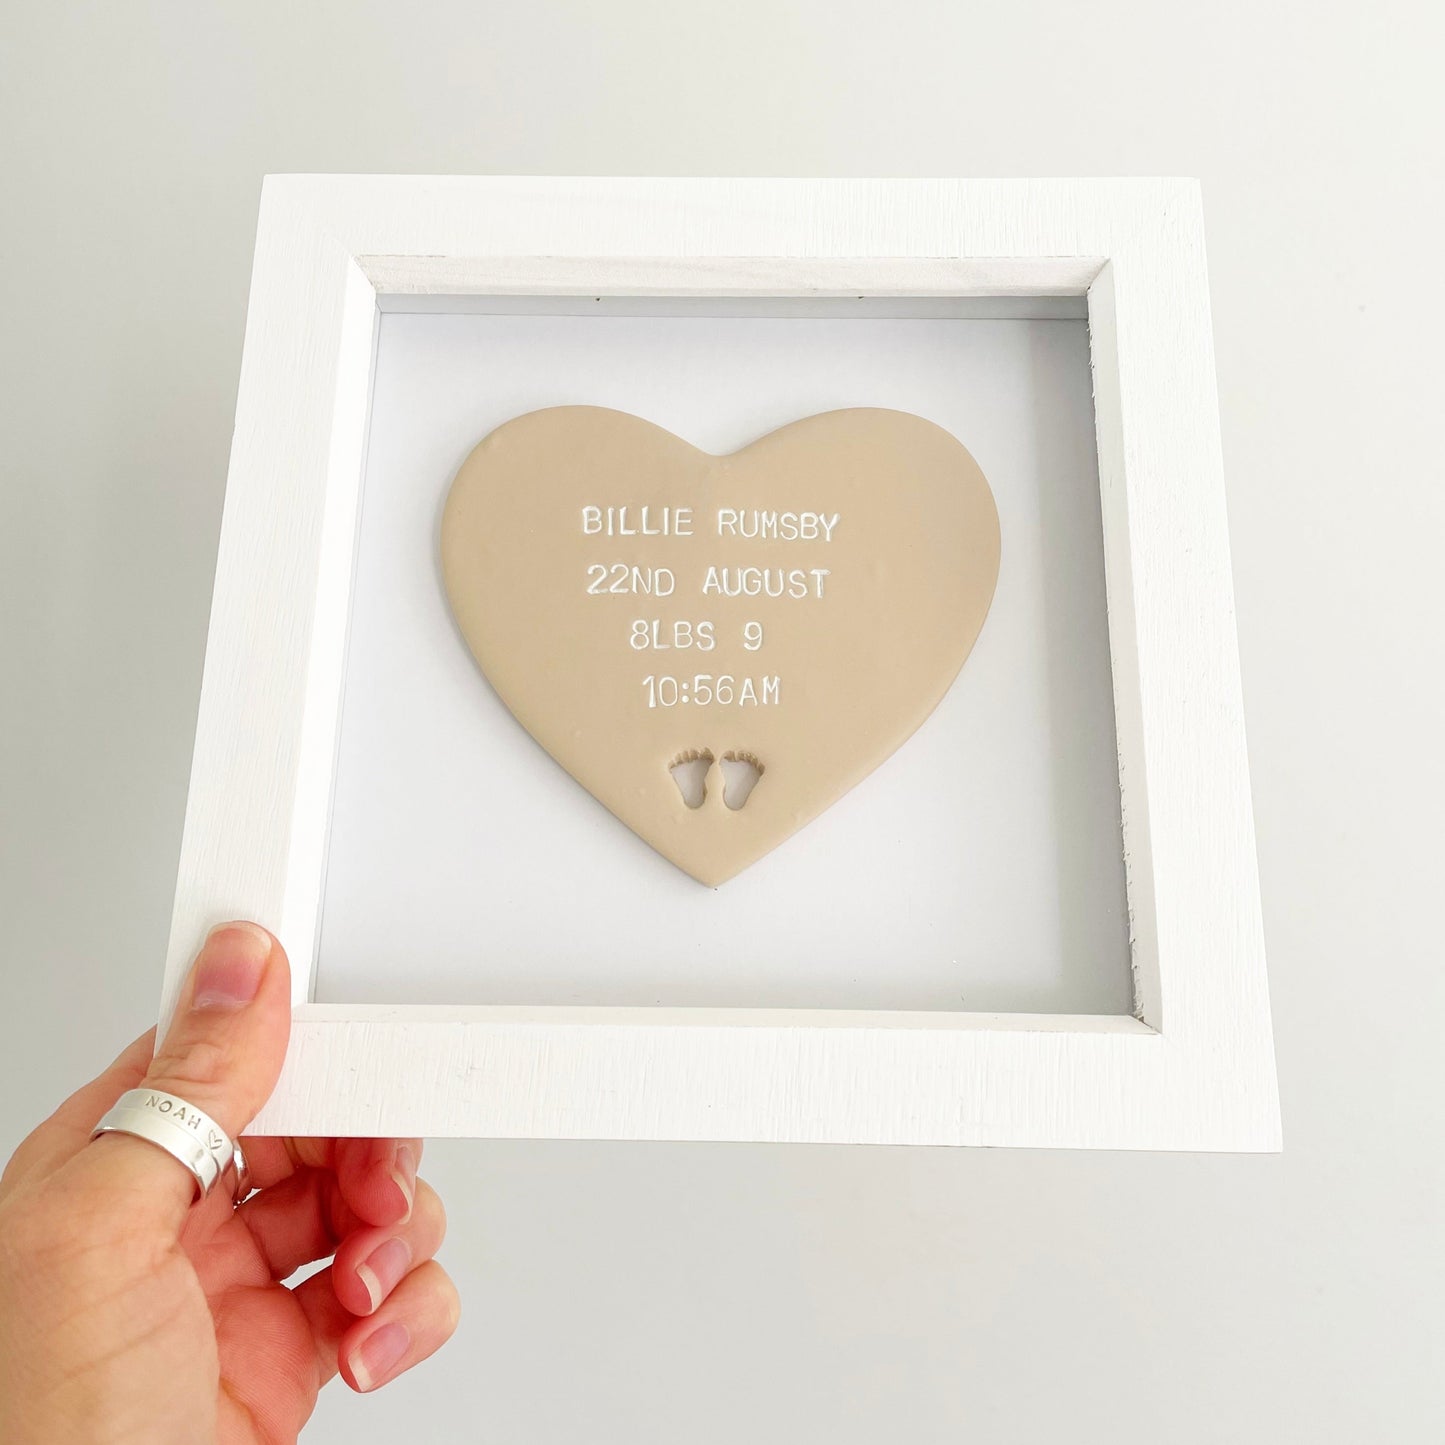 Personalised baby keepsake gift, beige clay heart with baby feet cut out at the bottom of the heart in a white box frame, the heart is personalised with the baby’s name, date of birth, weight and time